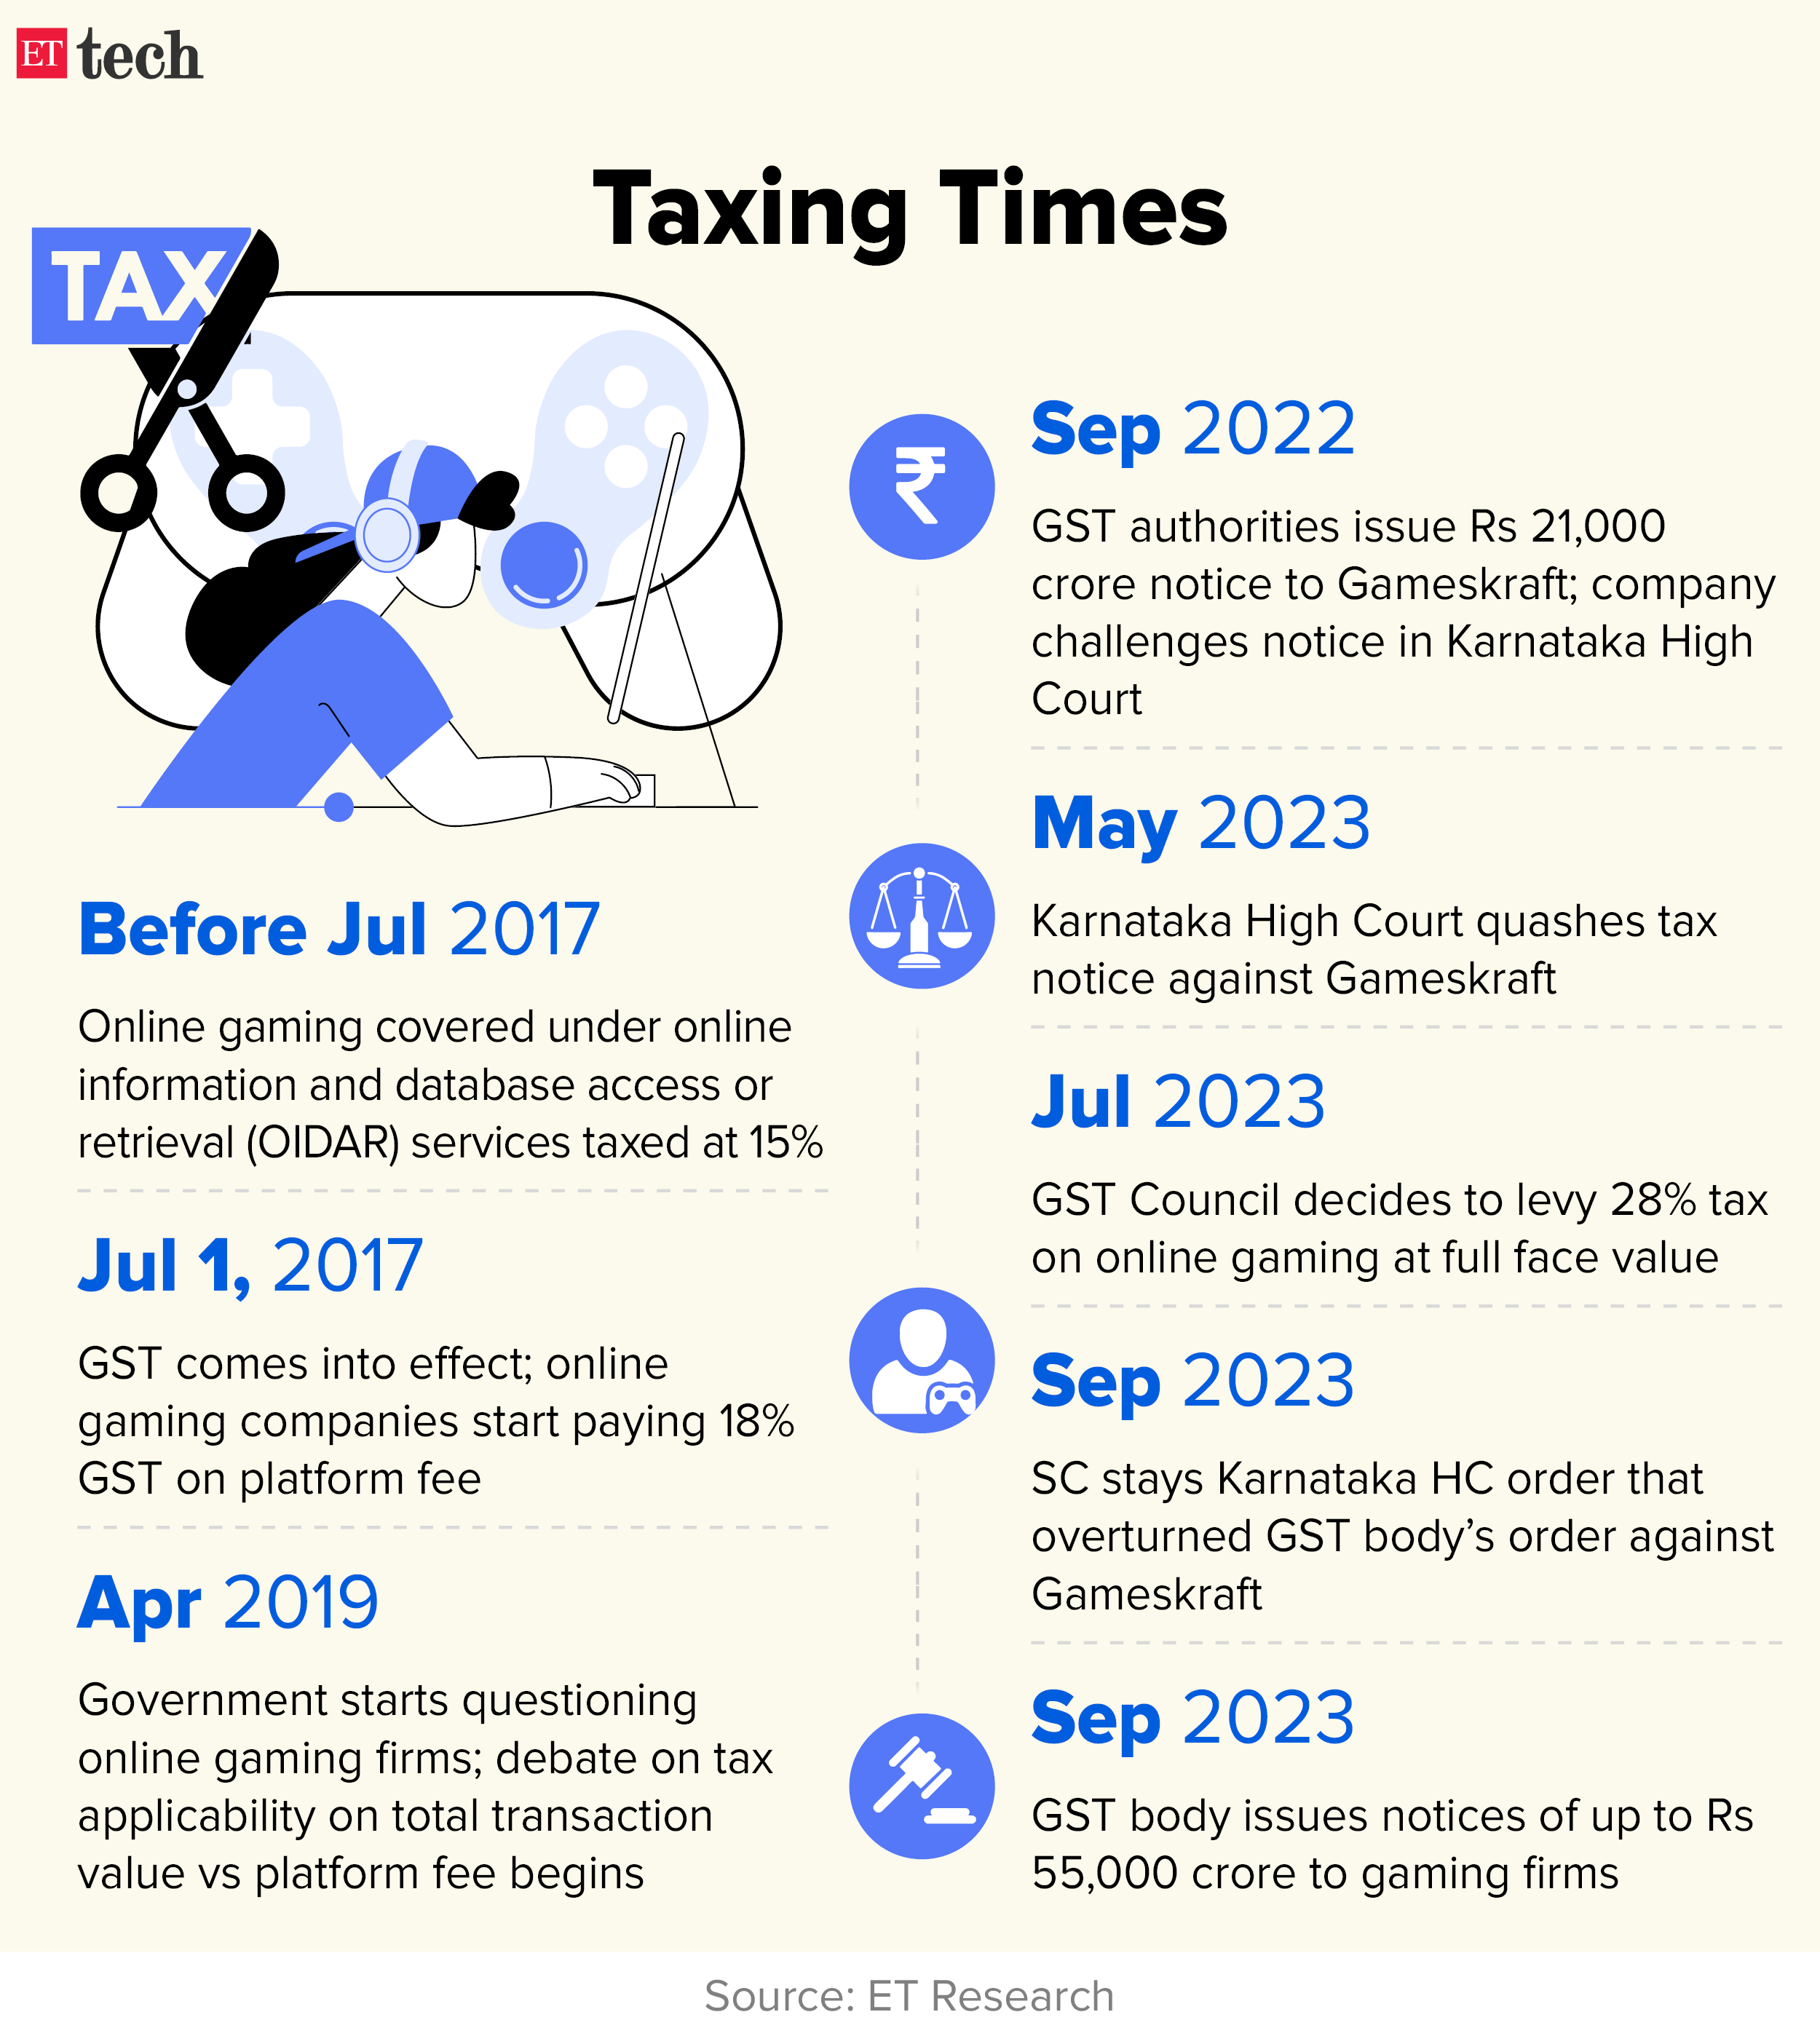 Taxing Times_online gaming_Timeline_Graphic_ETTECH